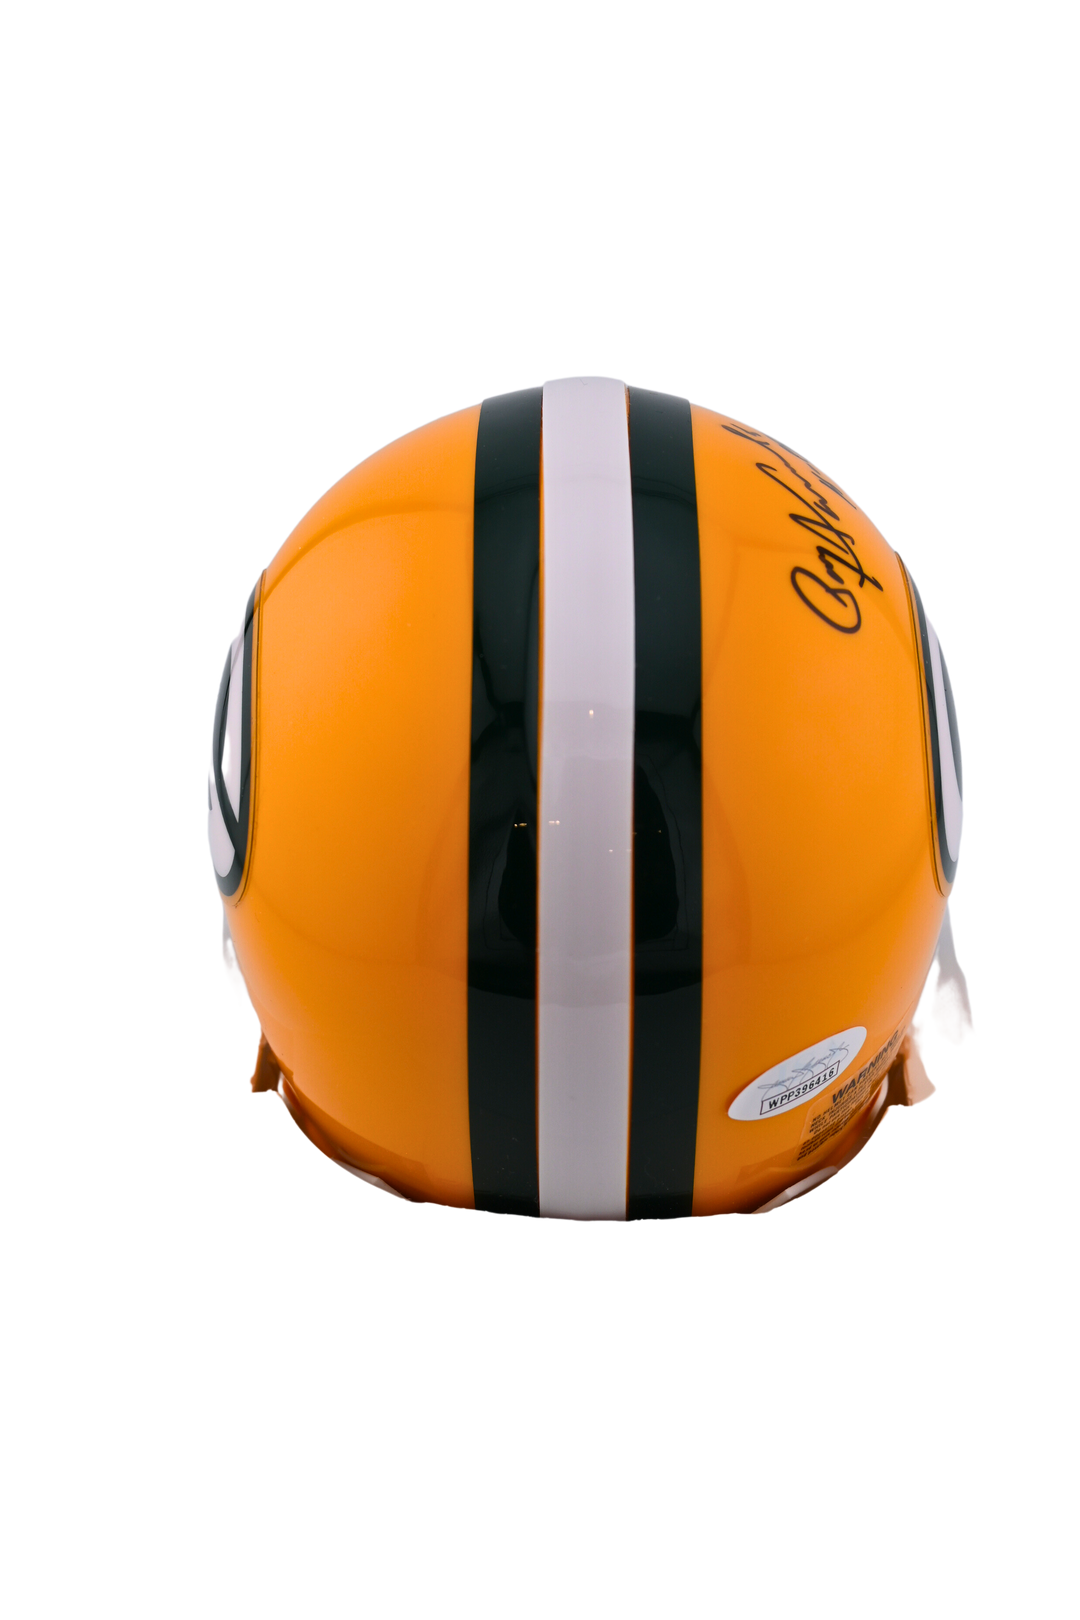 Paul Horning Green Bay Packers Autographed Mini-Helmet, JSA Authenticated